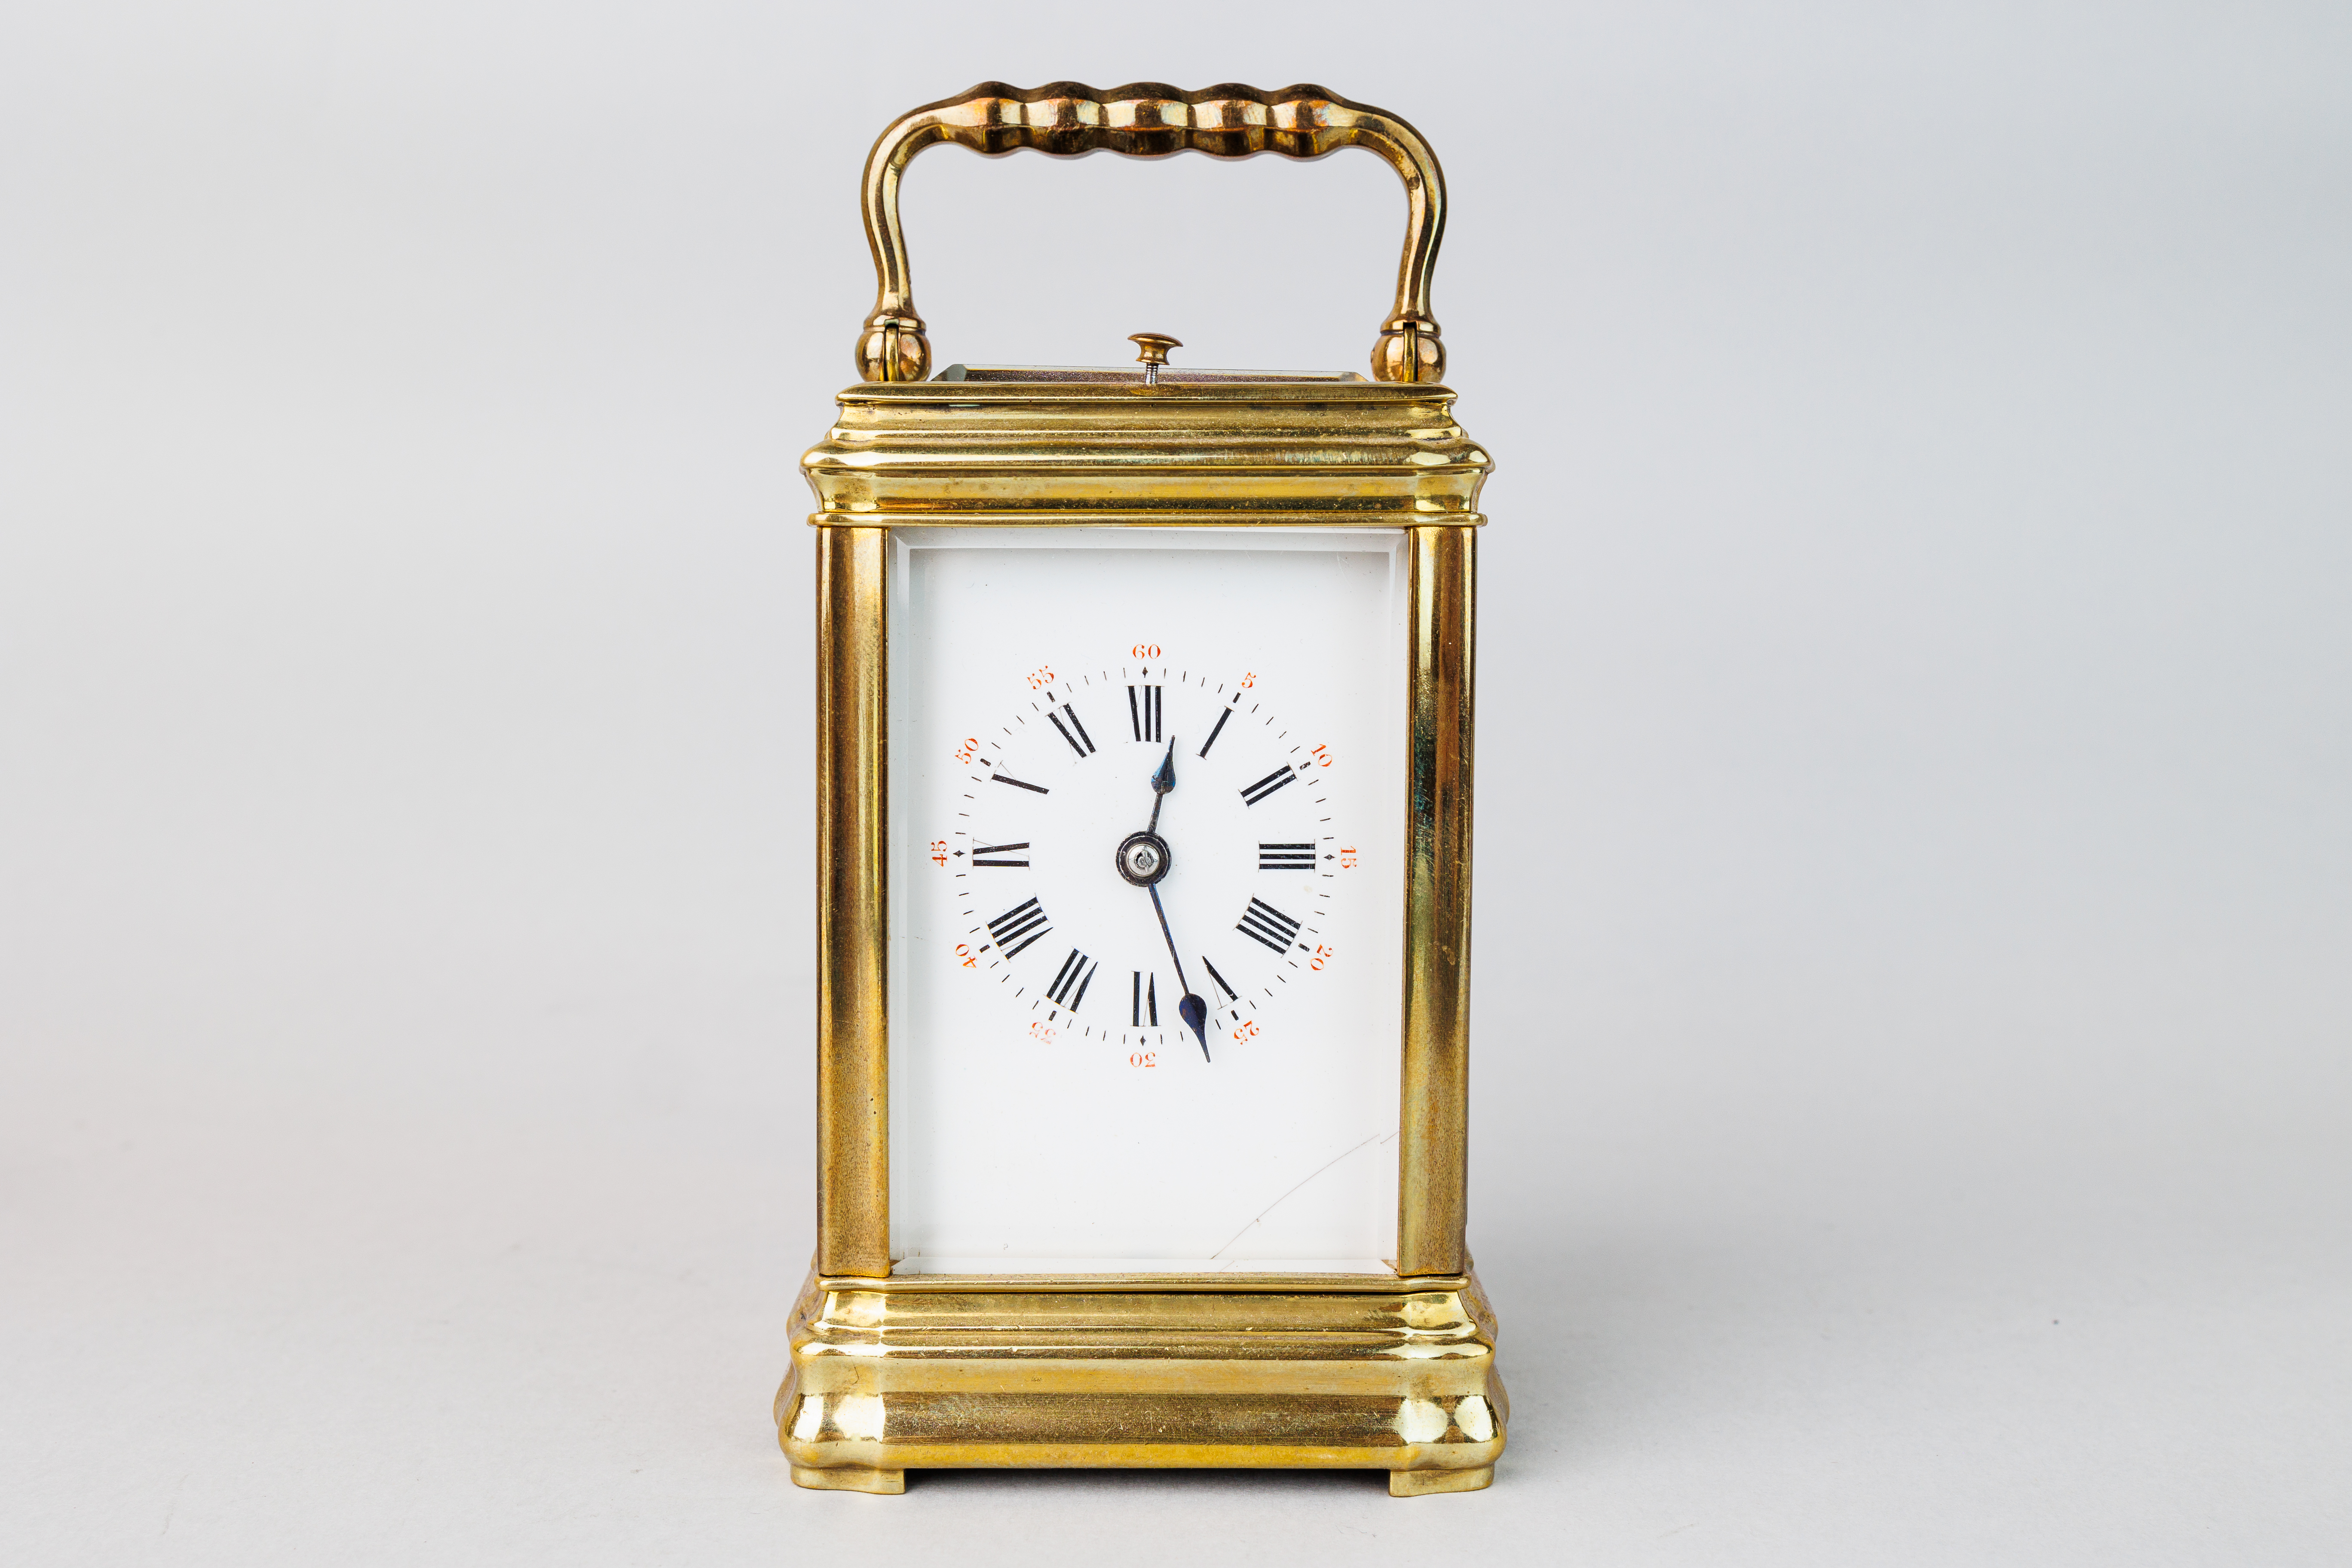 Miniature brass carriage clock in case - Image 12 of 21